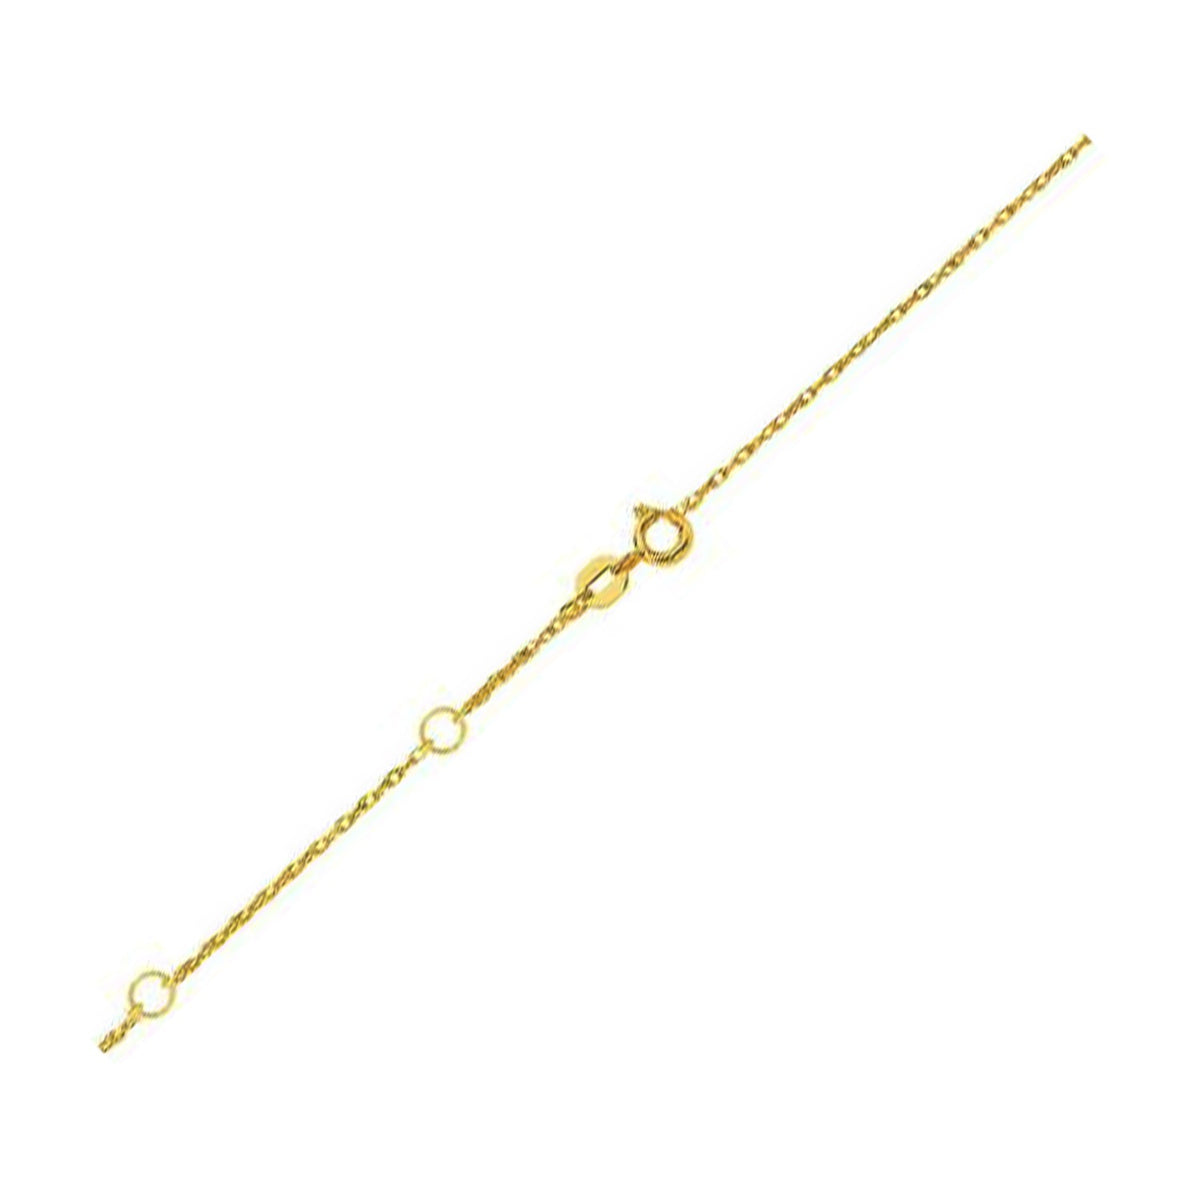 Double Extendable Rope Chain - 14k Yellow Gold 0.85mm